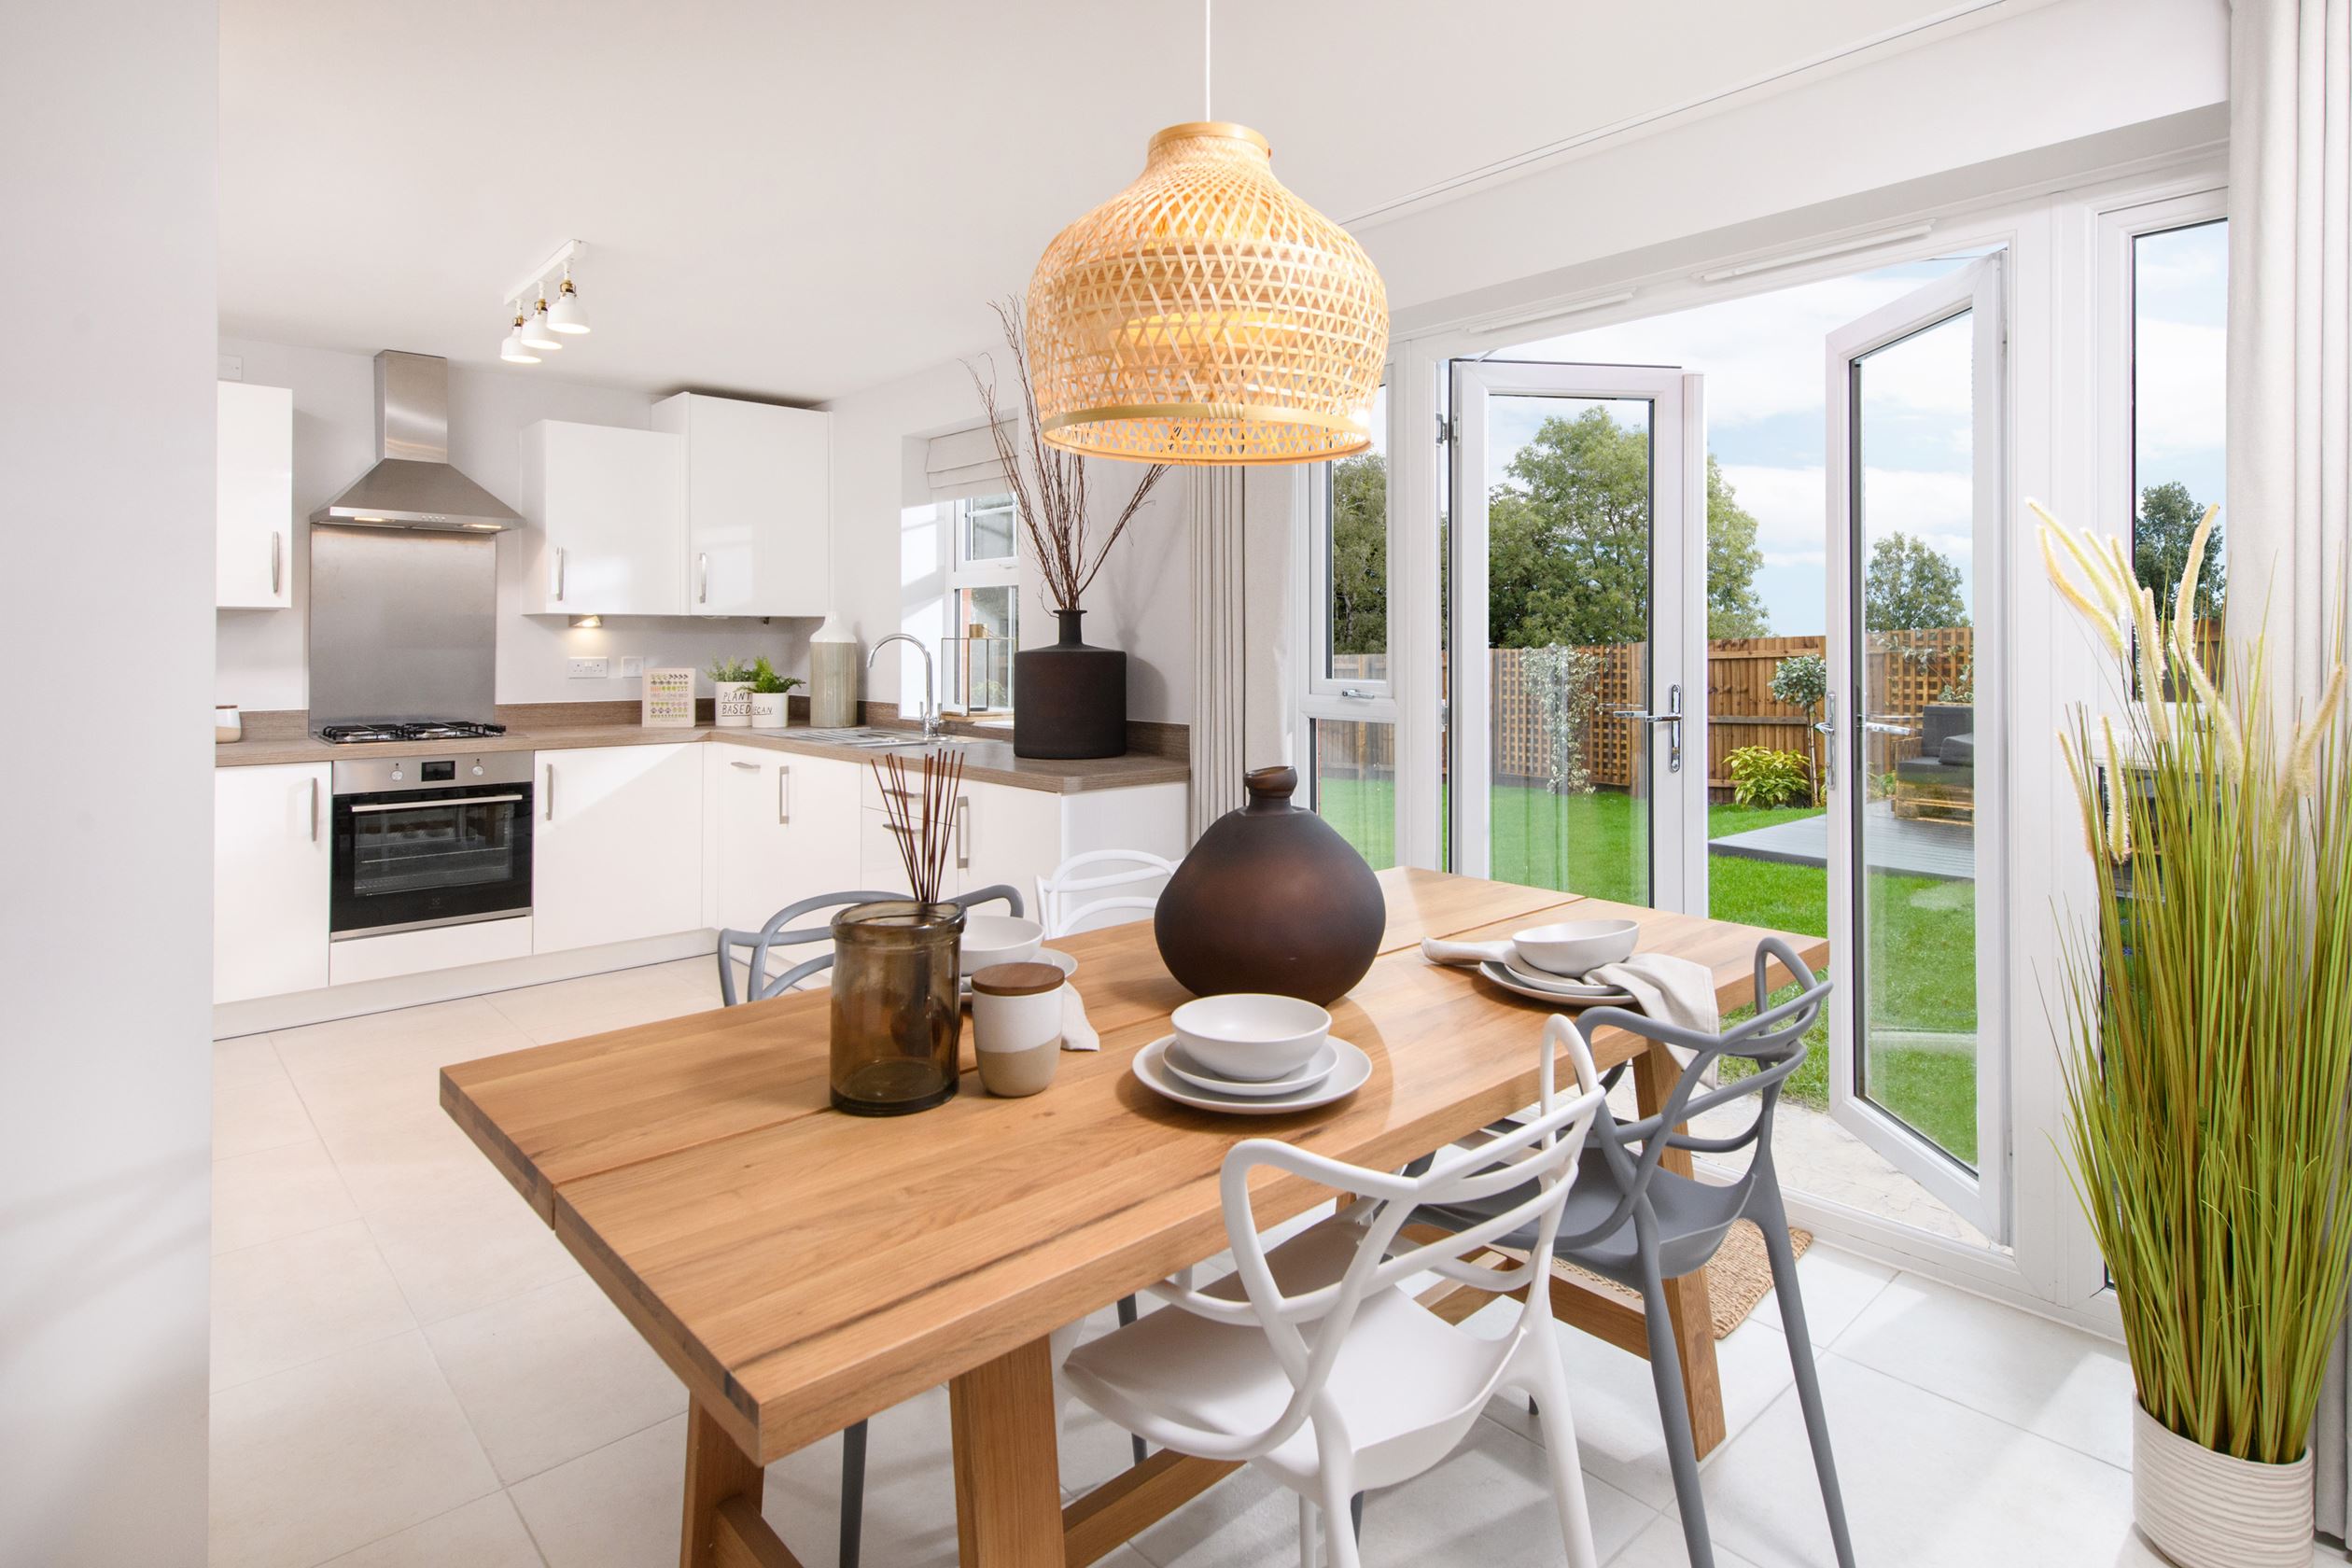 Property 3 of 10. Kingsley Open-Plan Kitchen/Dining Room